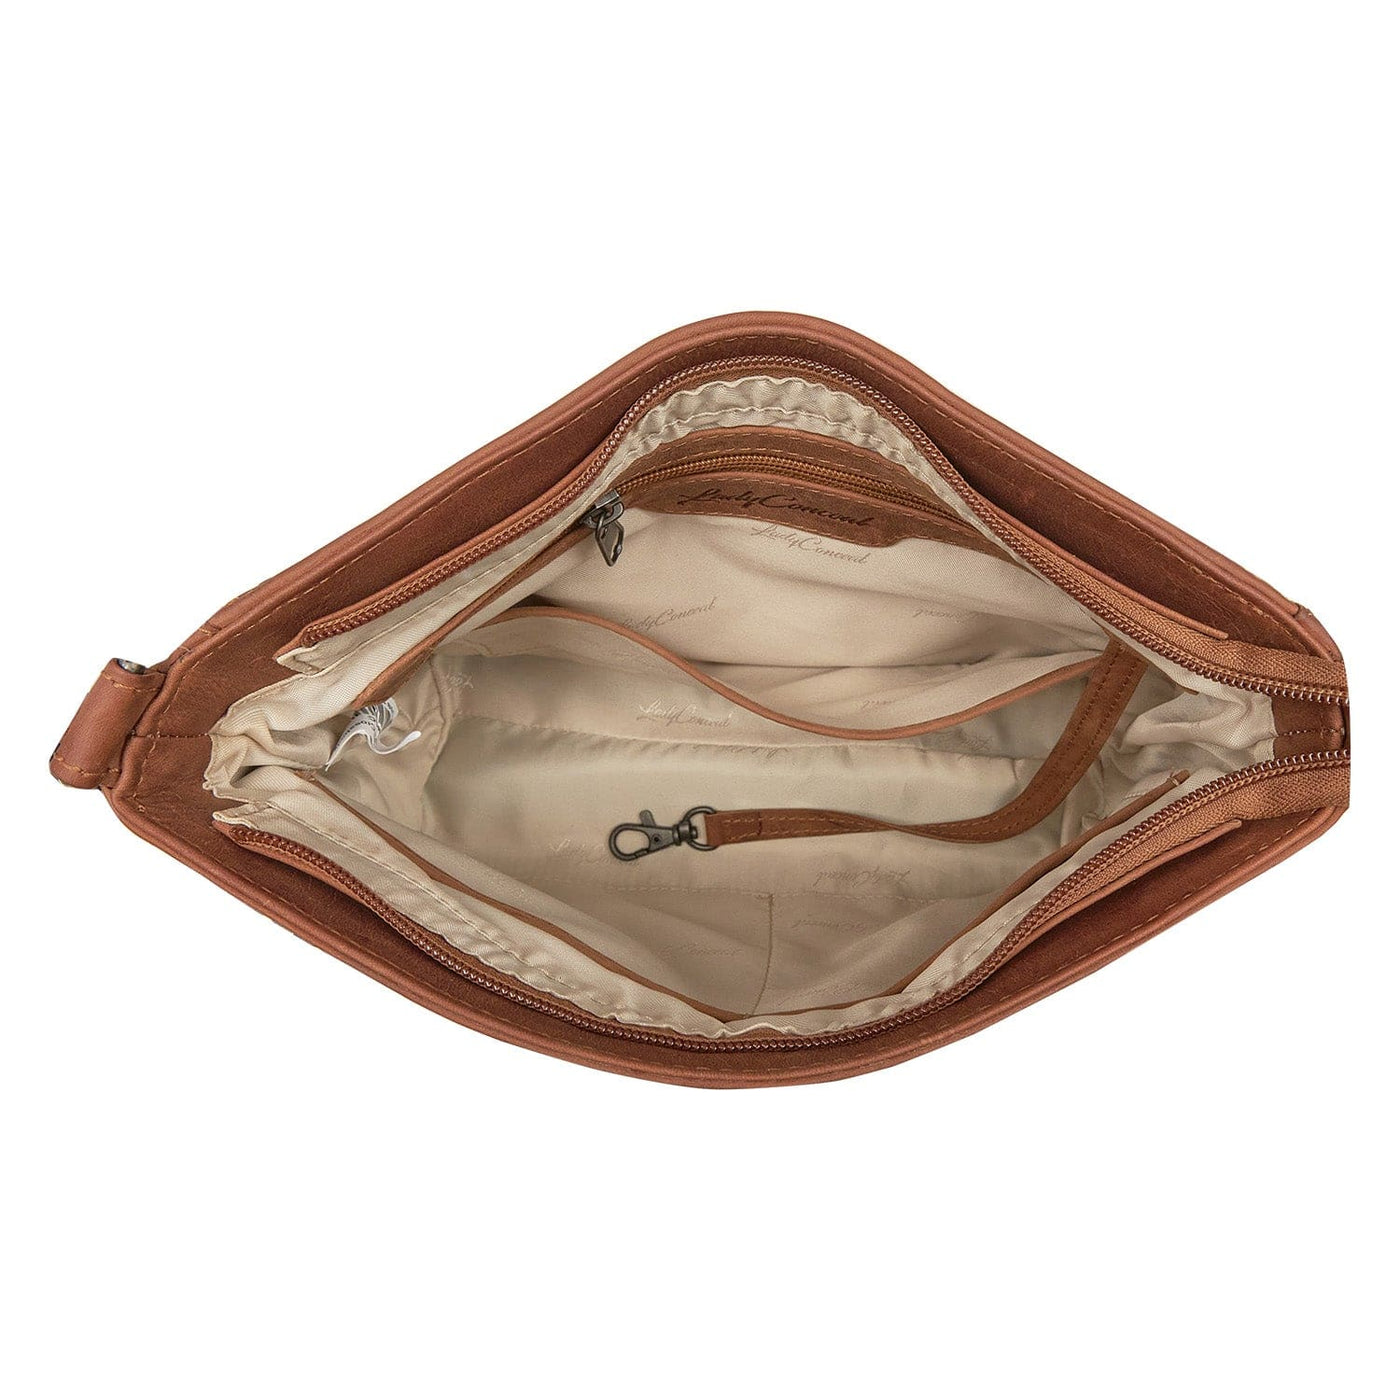 Concealed Carry Brynn Arched Leather Crossbody -  Lady Conceal -  Concealed Carry Purse - conceal and carry purse for women - tactical pistol bag - Locking Conceal and Carry Purse with Universal Holster for Handguns - Unique Hide Crossbody Gun and Pistol Bag